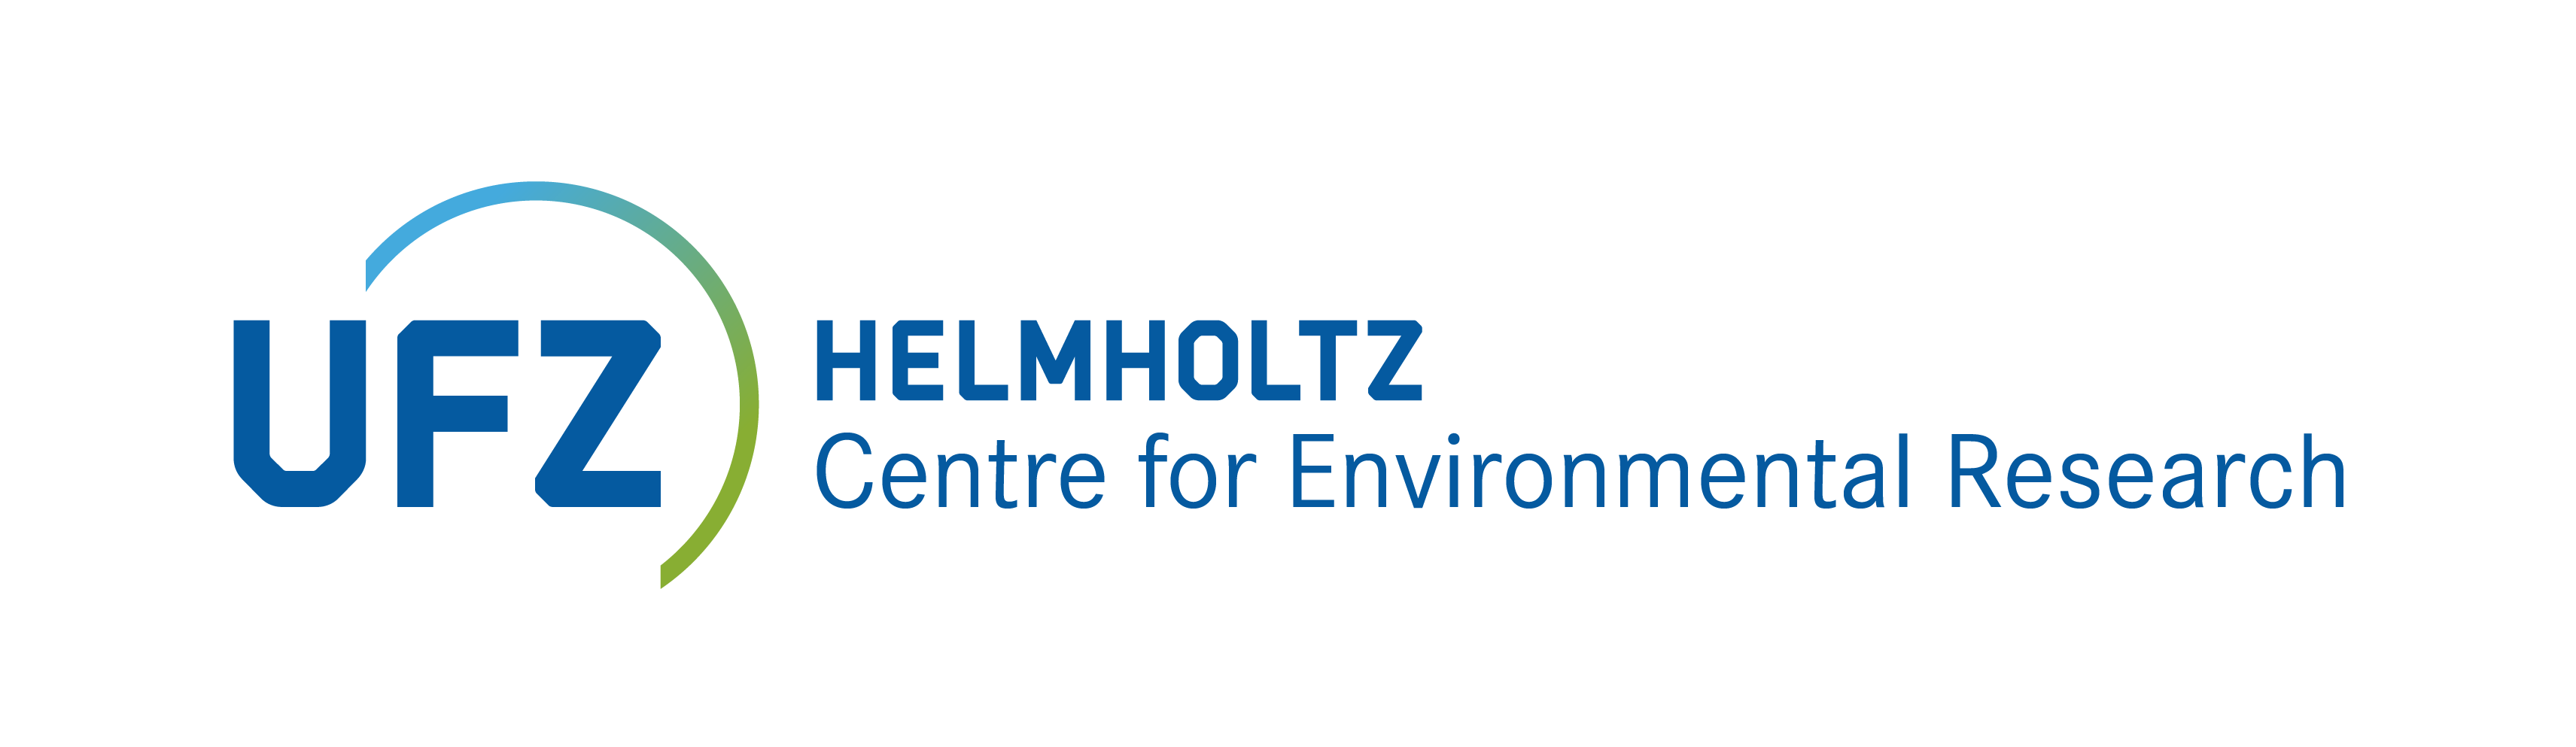 Helmholtz Centre for Environmental Research - UFZ